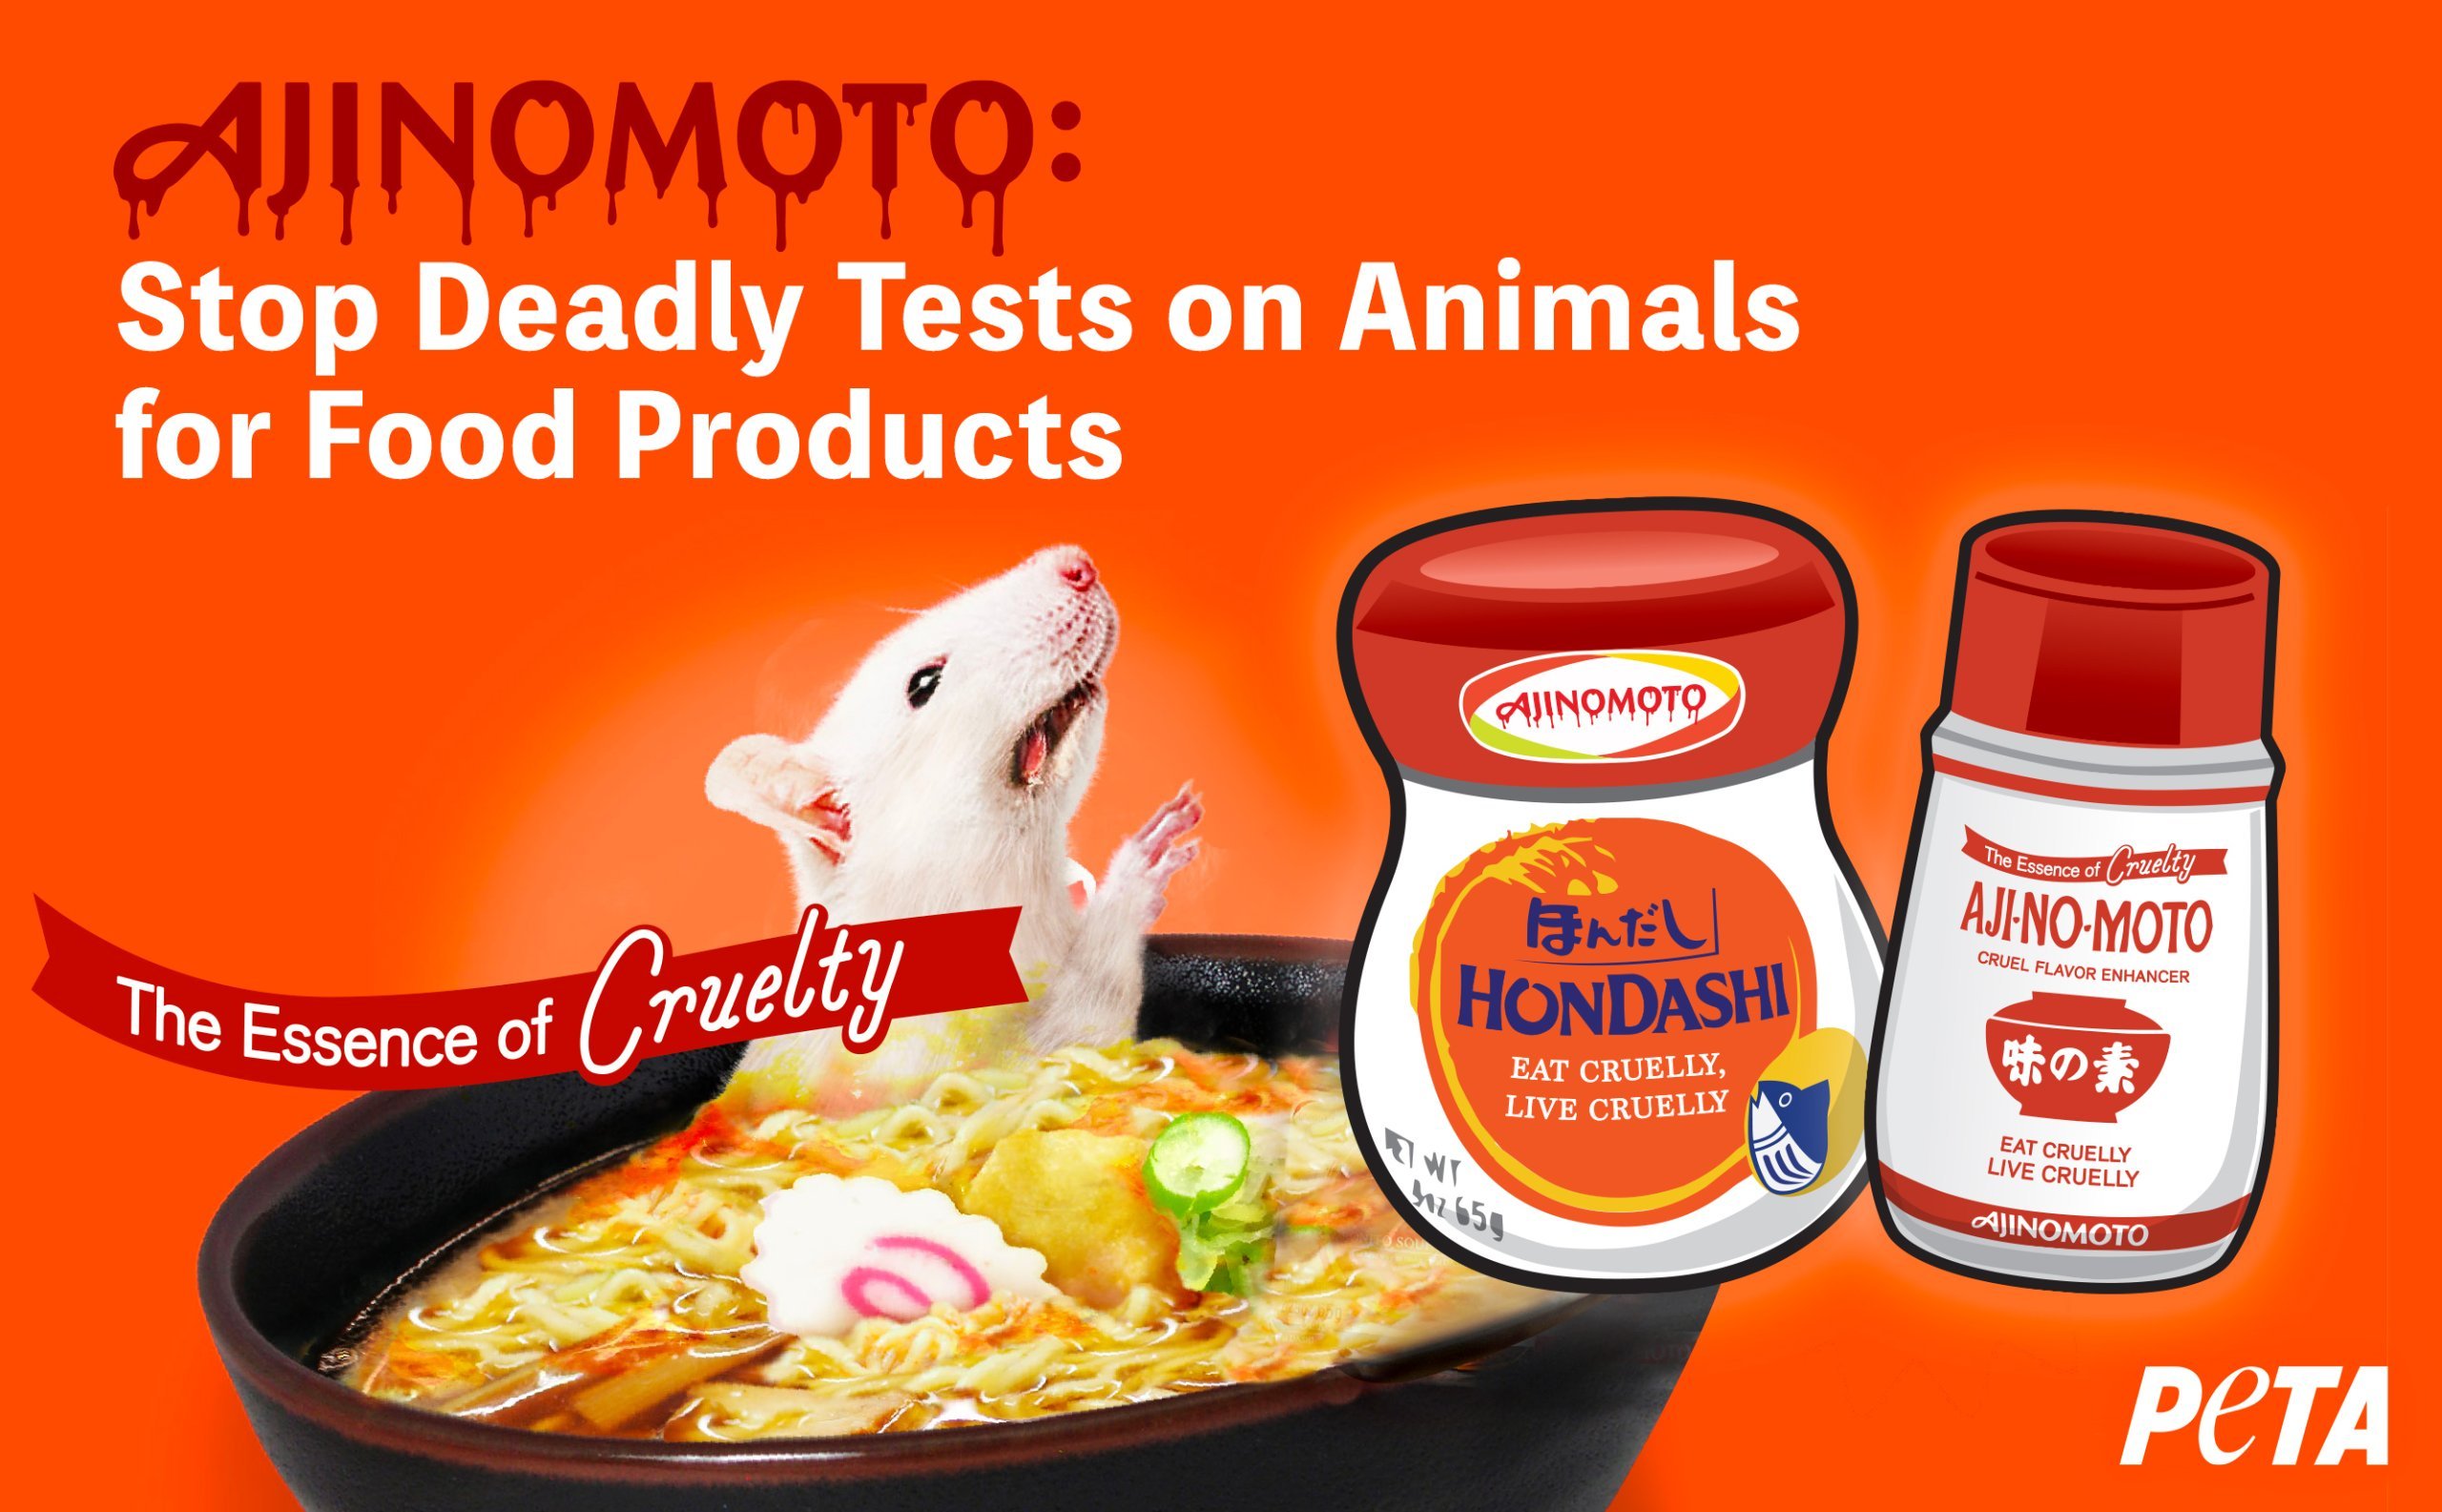 Ajinomoto: Stop deadly tests on animals for food products.